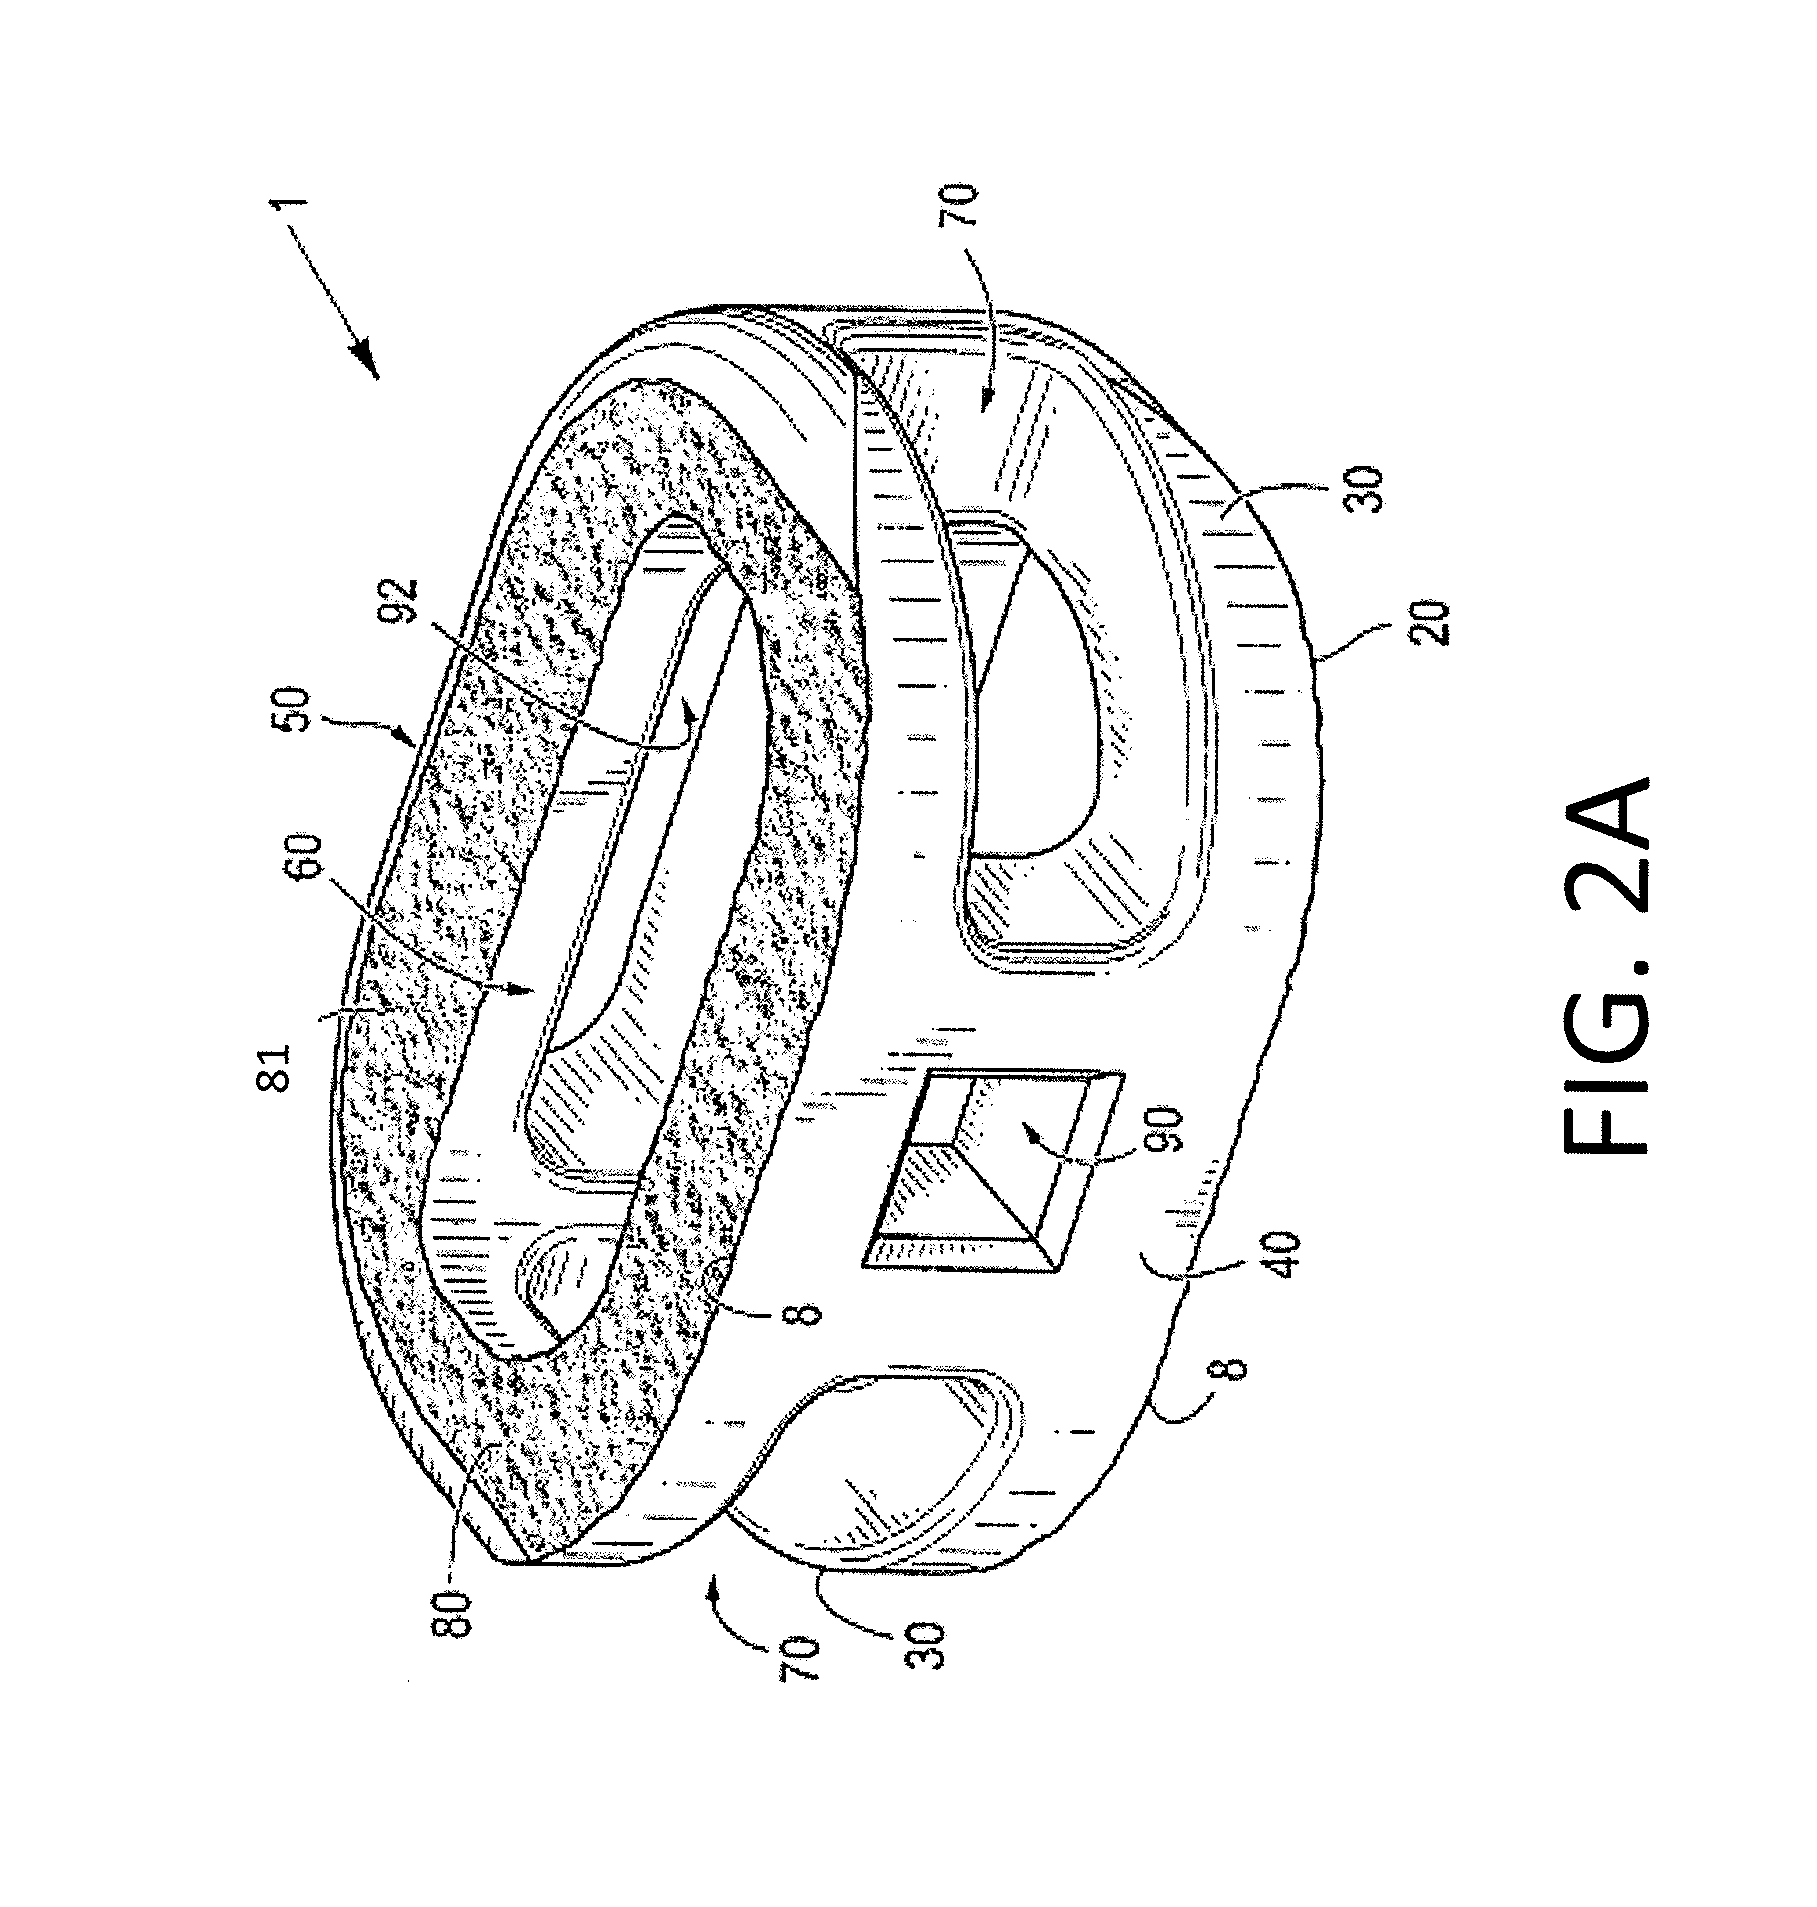 Process of fabricating composite implants having integration surfaces composed of a regular repeating pattern